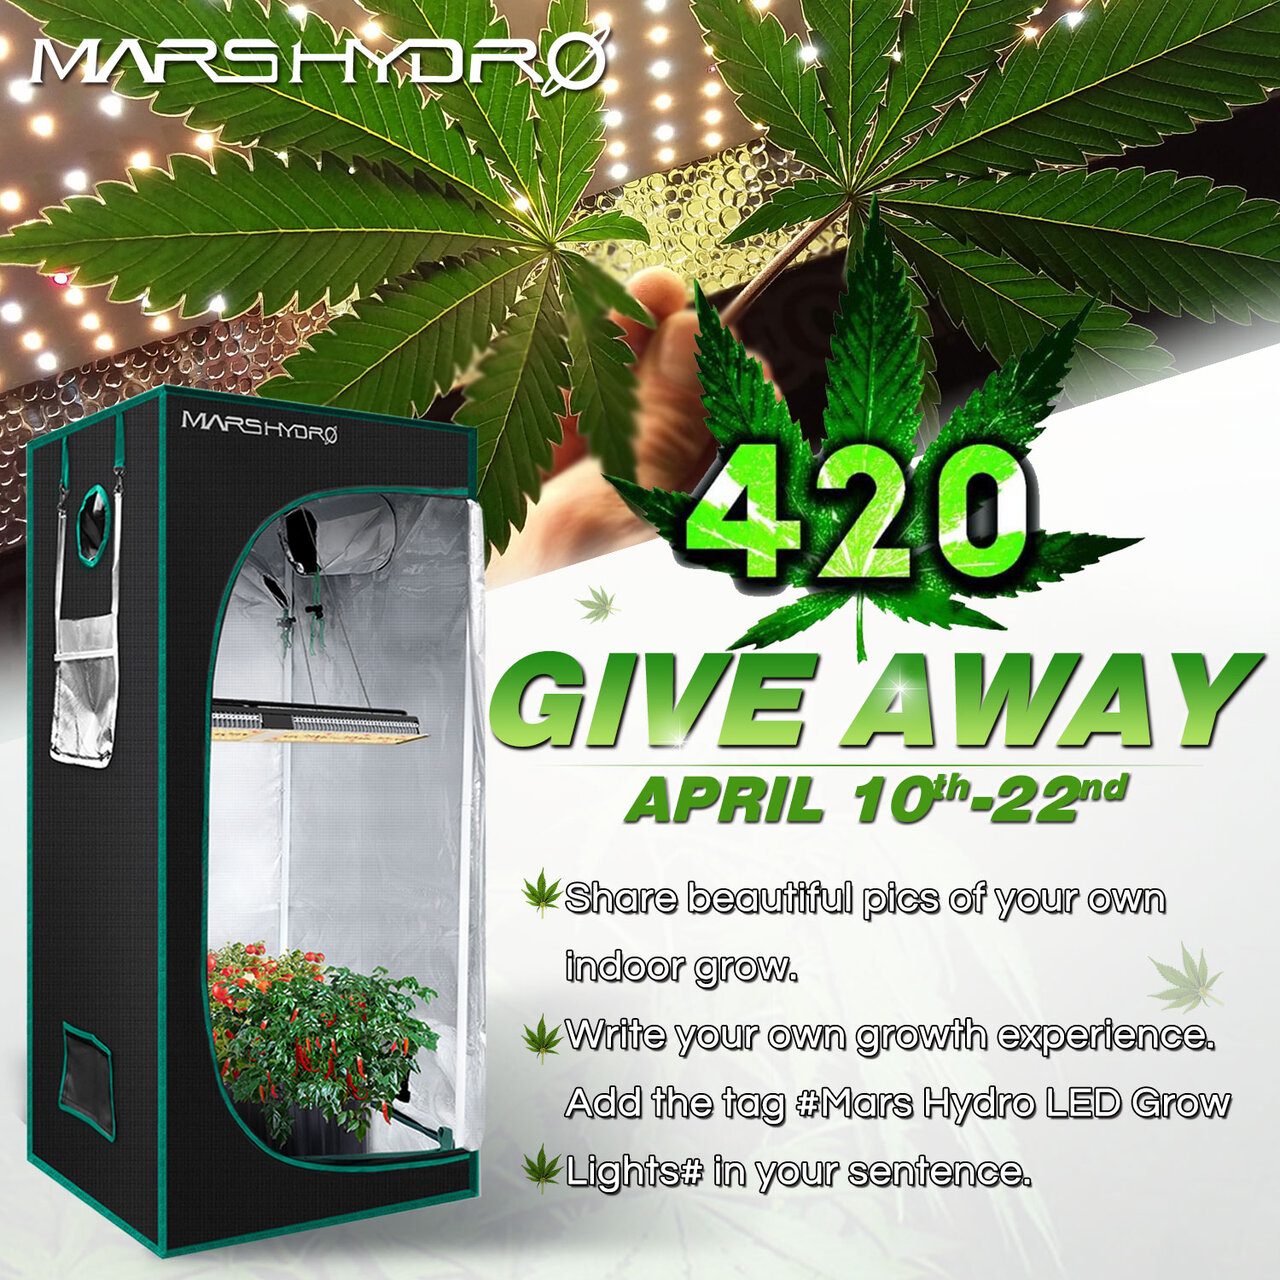 Mars Hydro 420 Giveaway